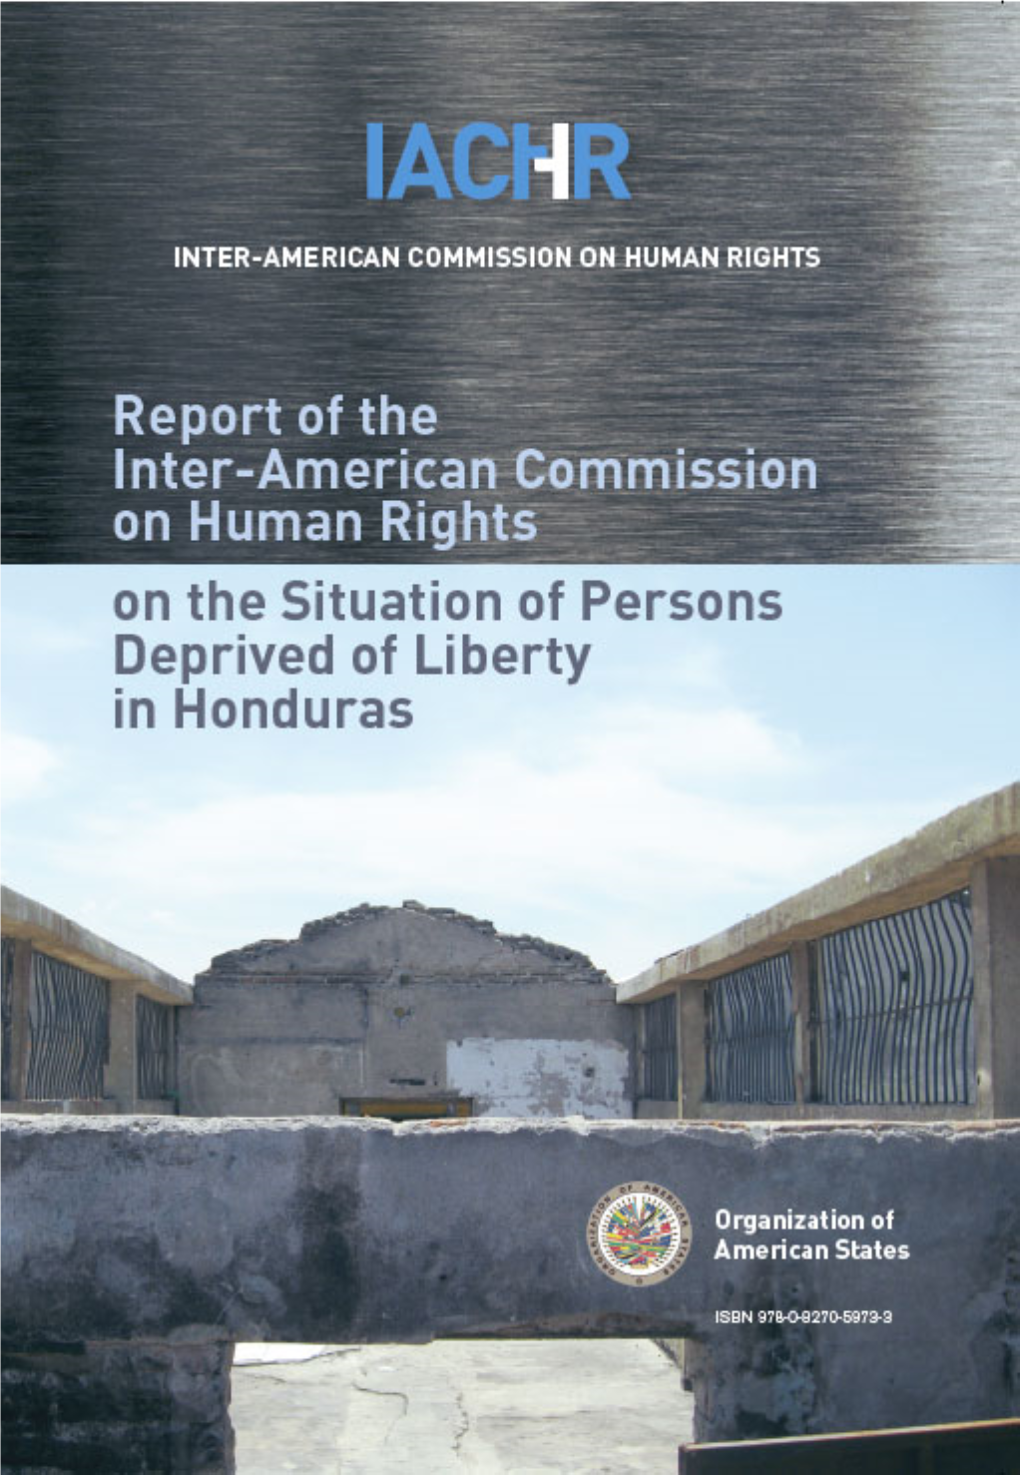 The Situation of Persons Deprived of Liberty in Honduras